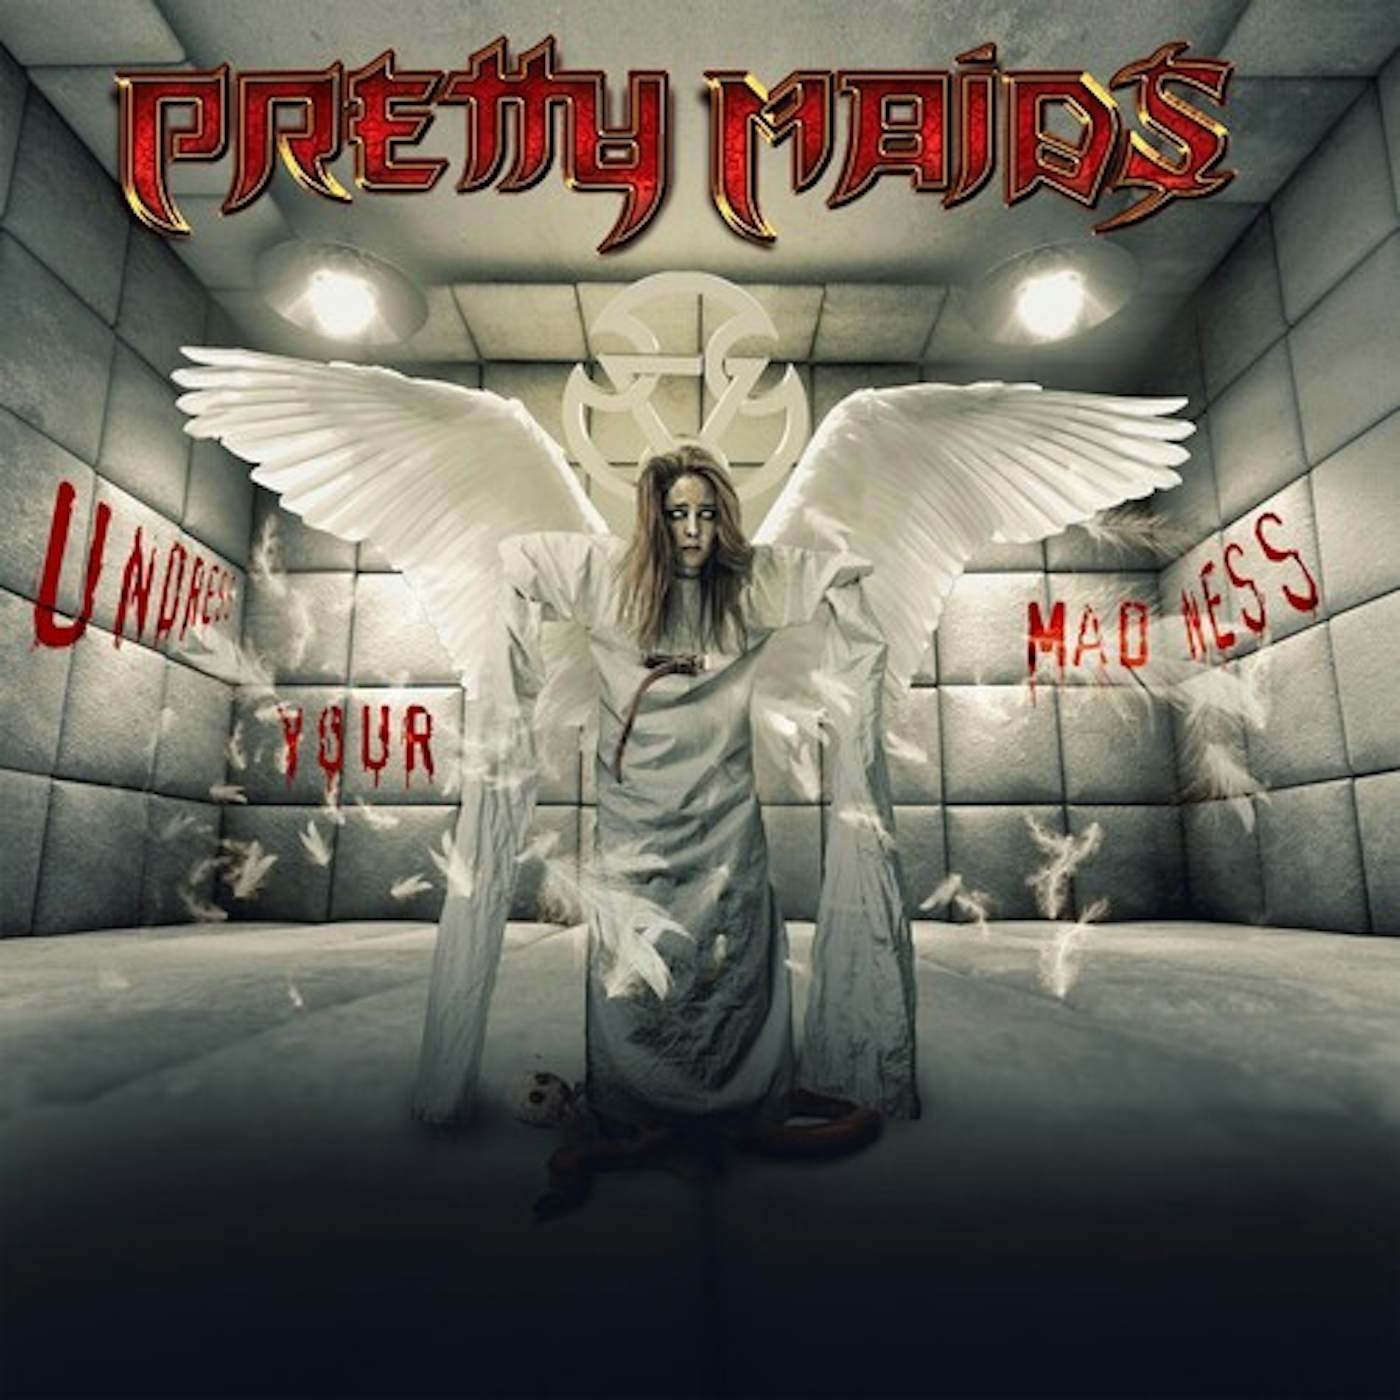 Pretty Maids UNDRESS YOUR MADNESS Vinyl Record